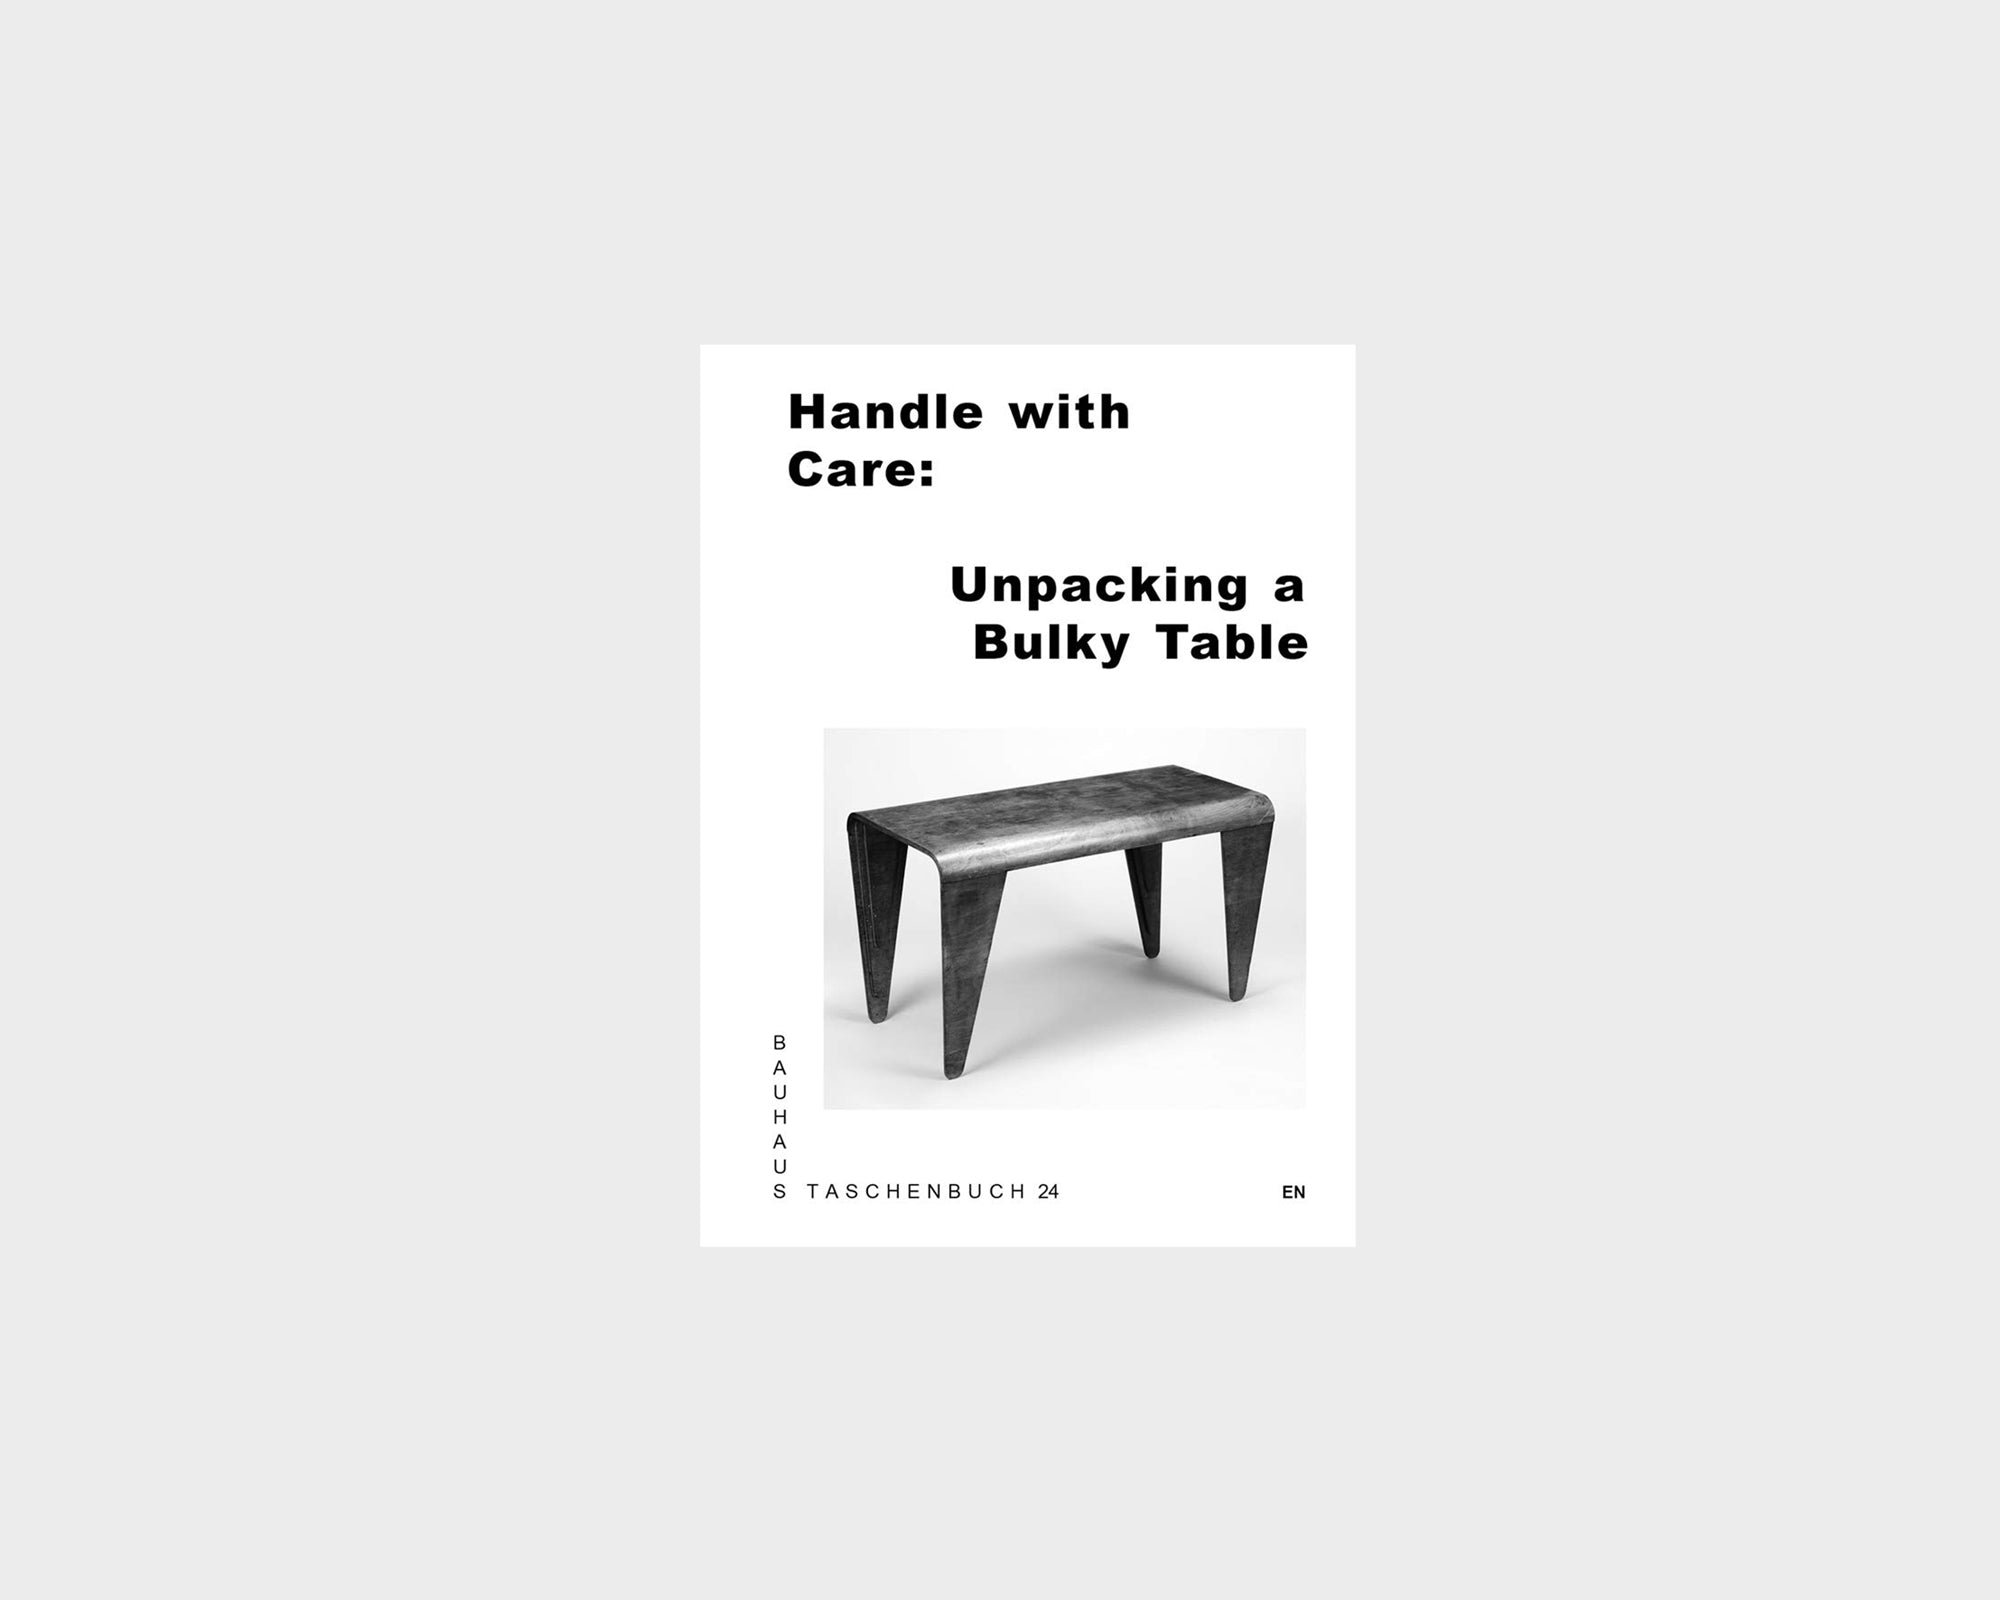 Handle With Care: Unpacking a Bulky Table